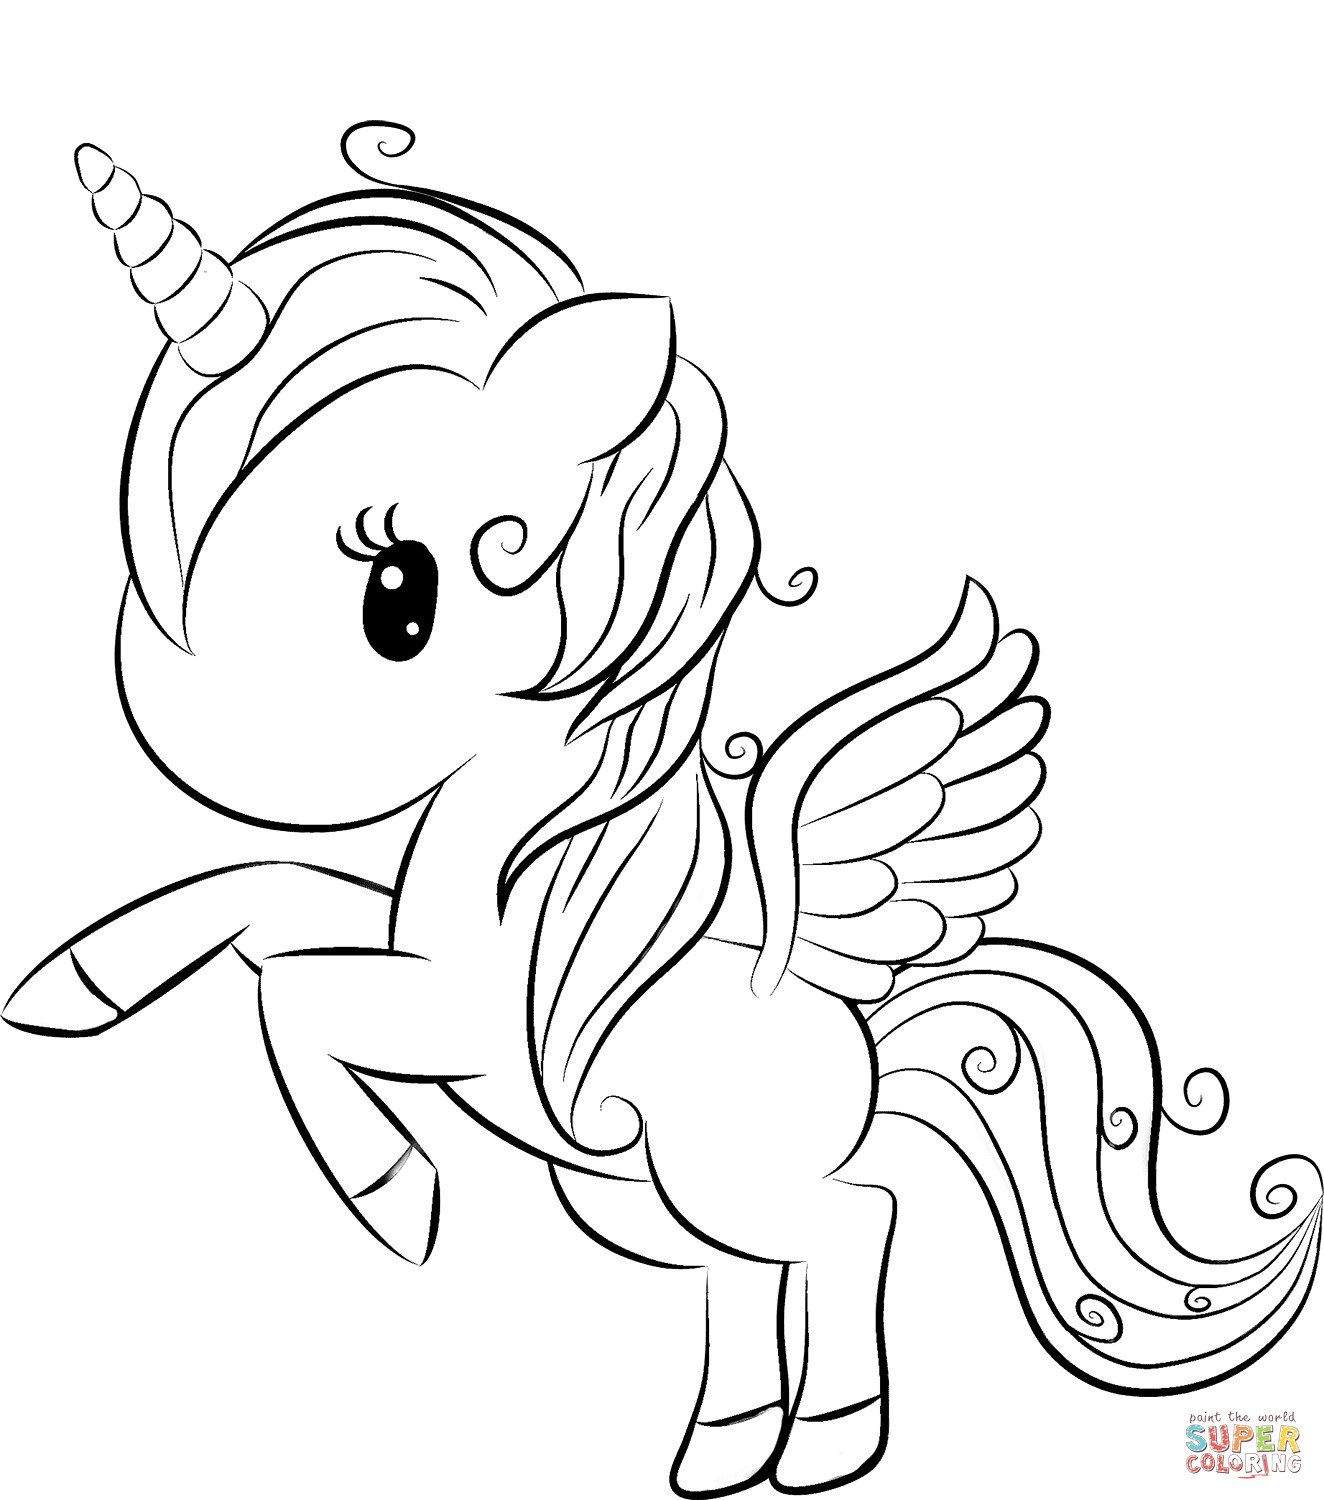 Unicorn Coloring Pages For Girls
 Cute Unicorn coloring page